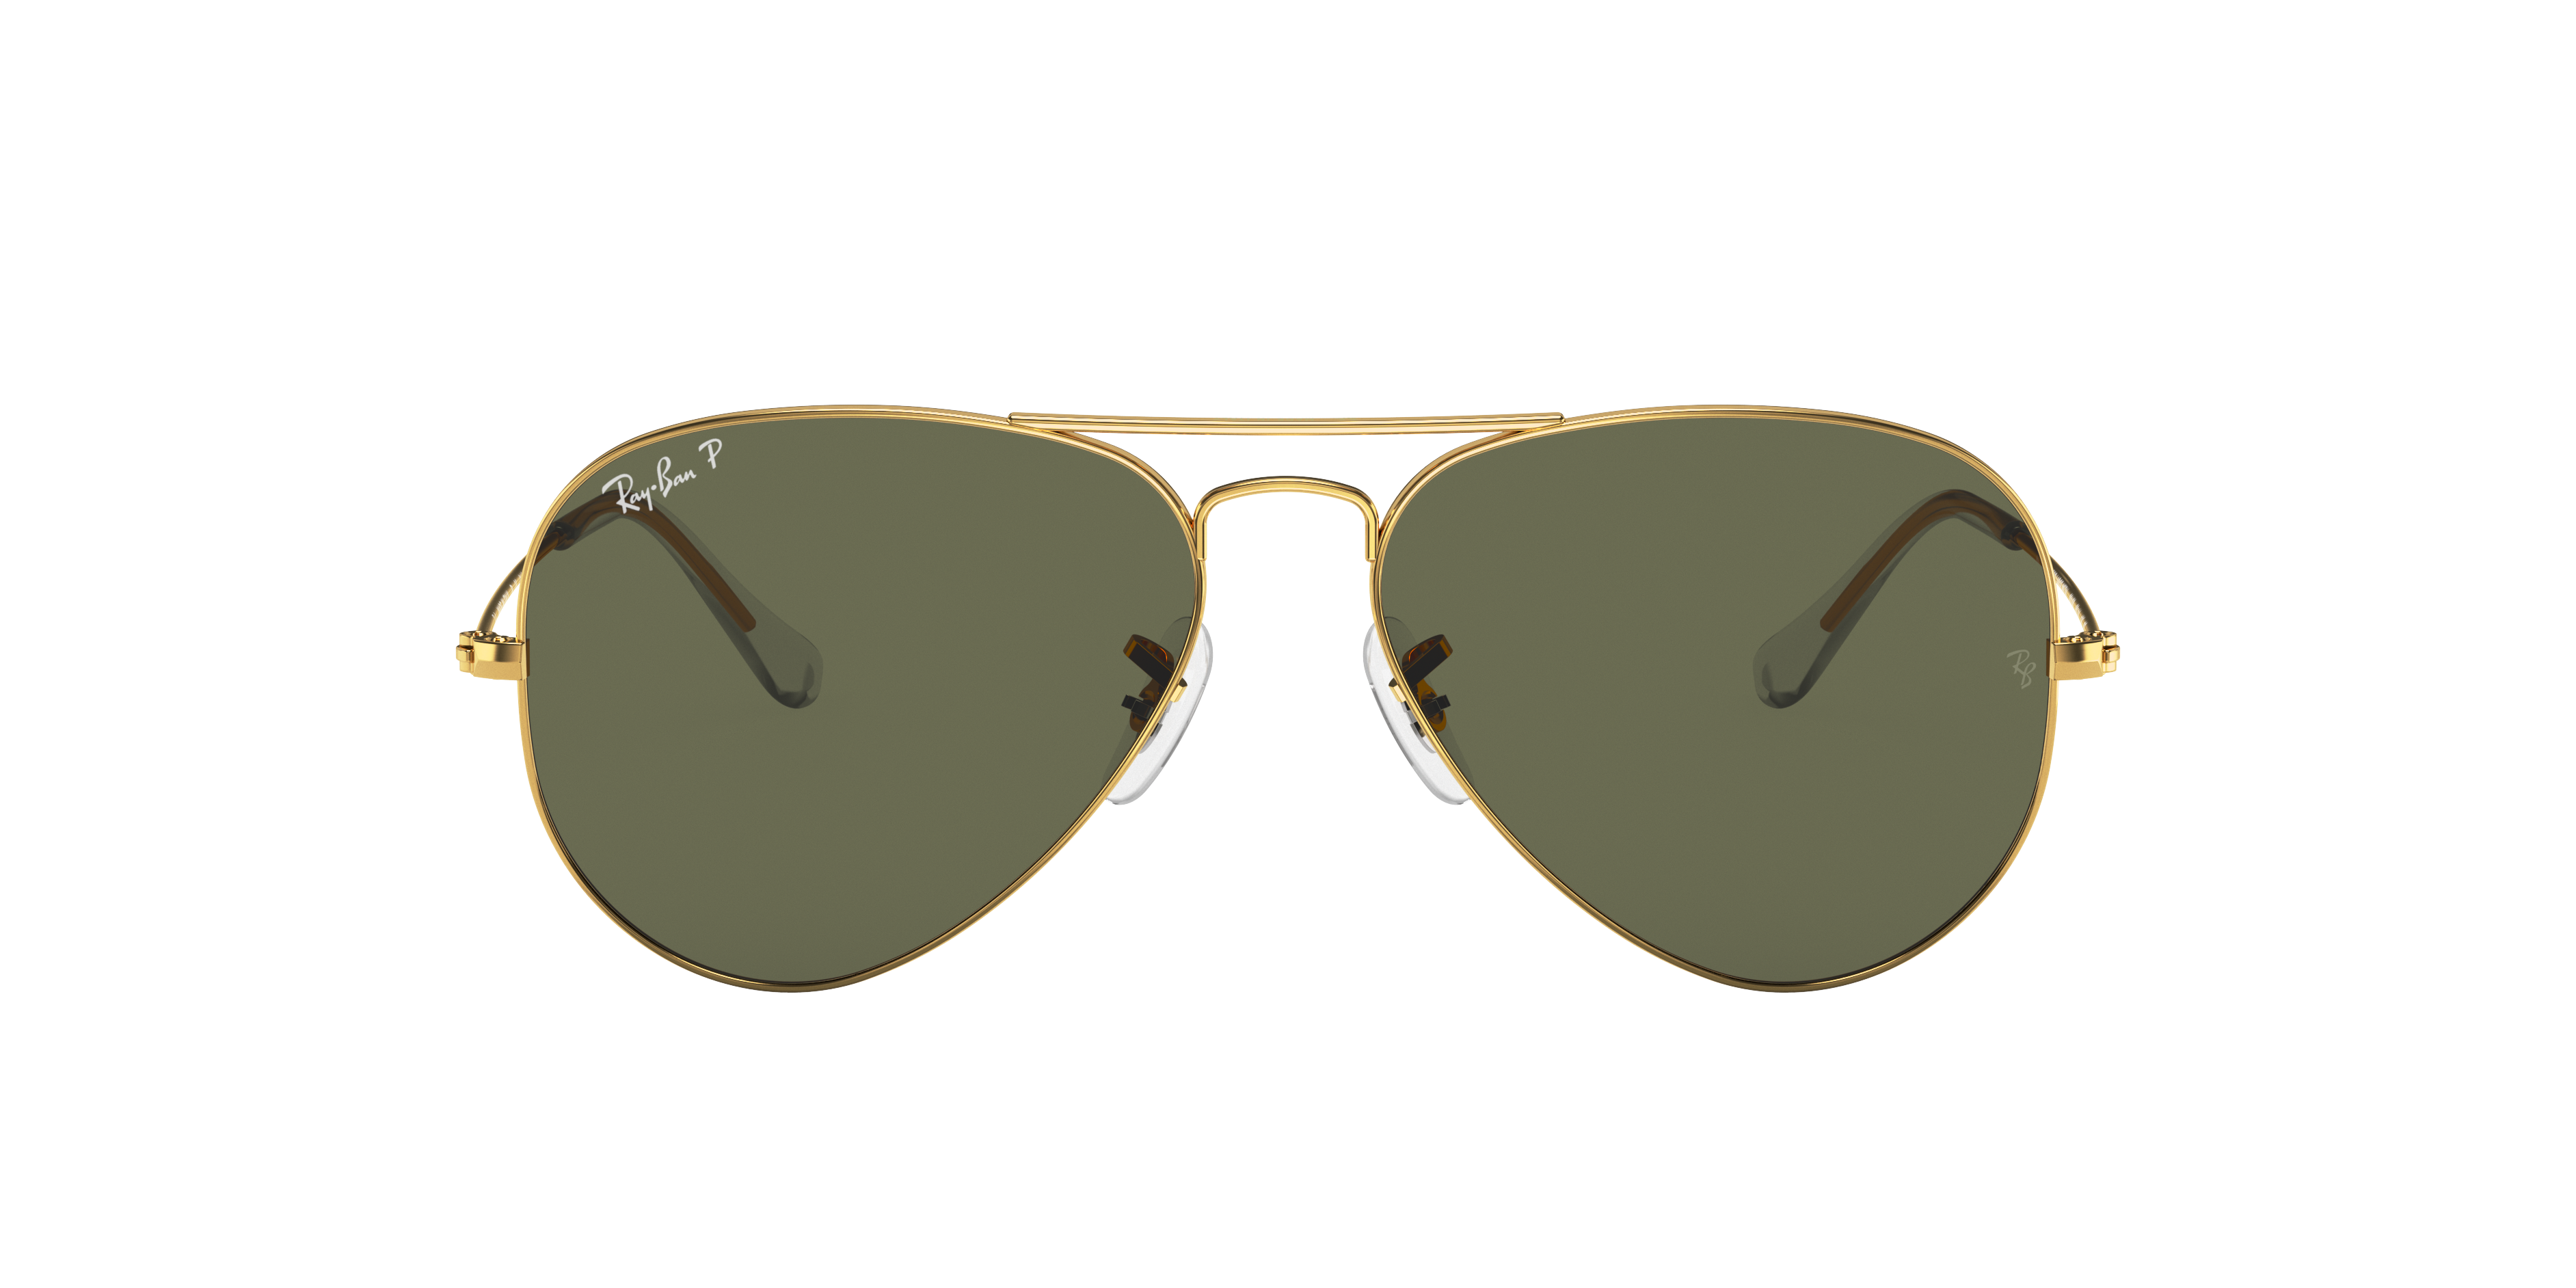 official ray ban replacement lenses uk